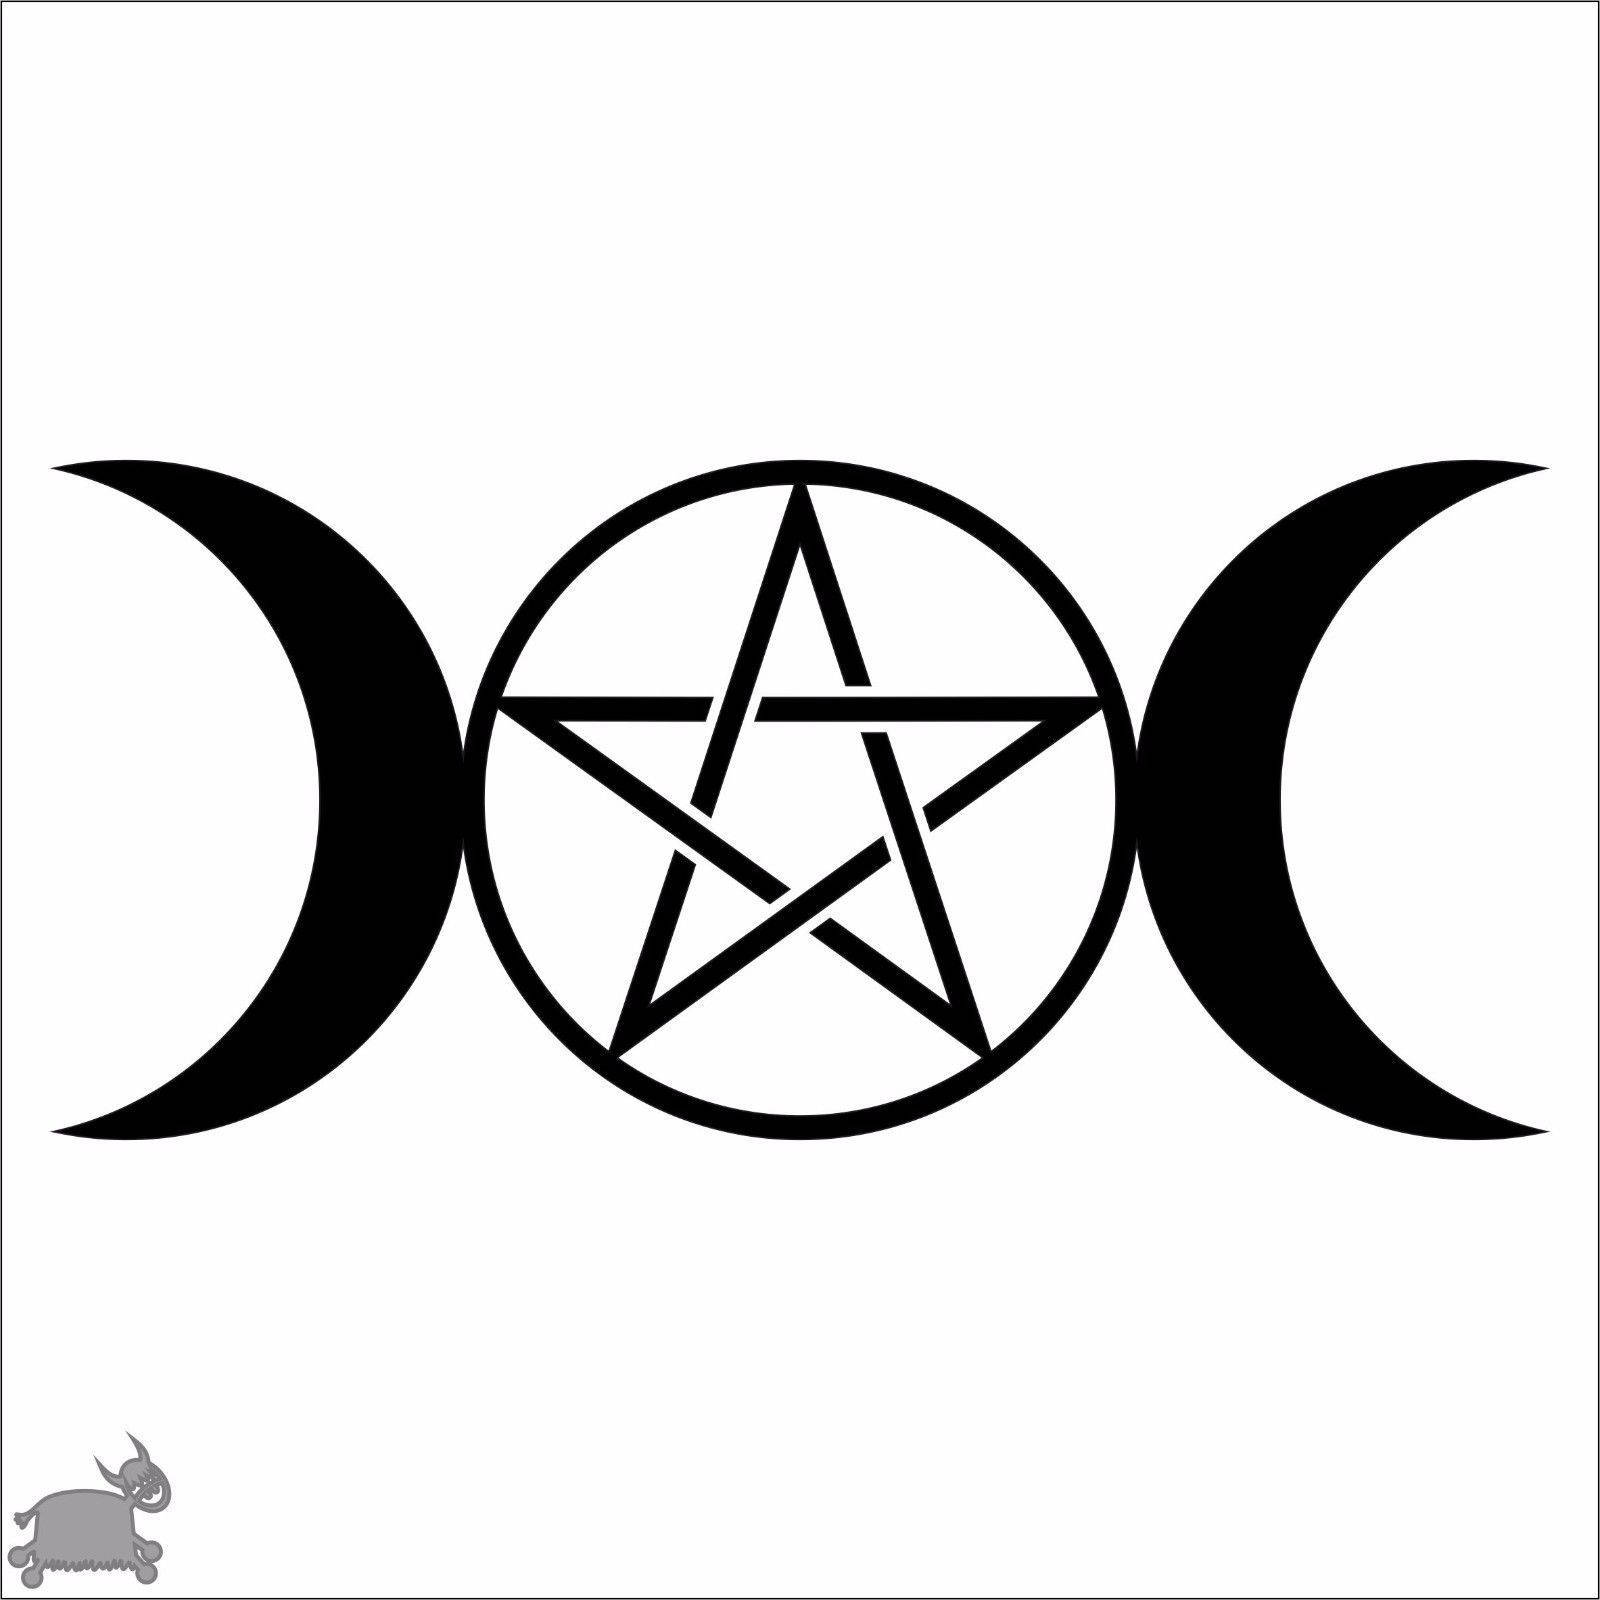 Pentagram With Crescent Moons